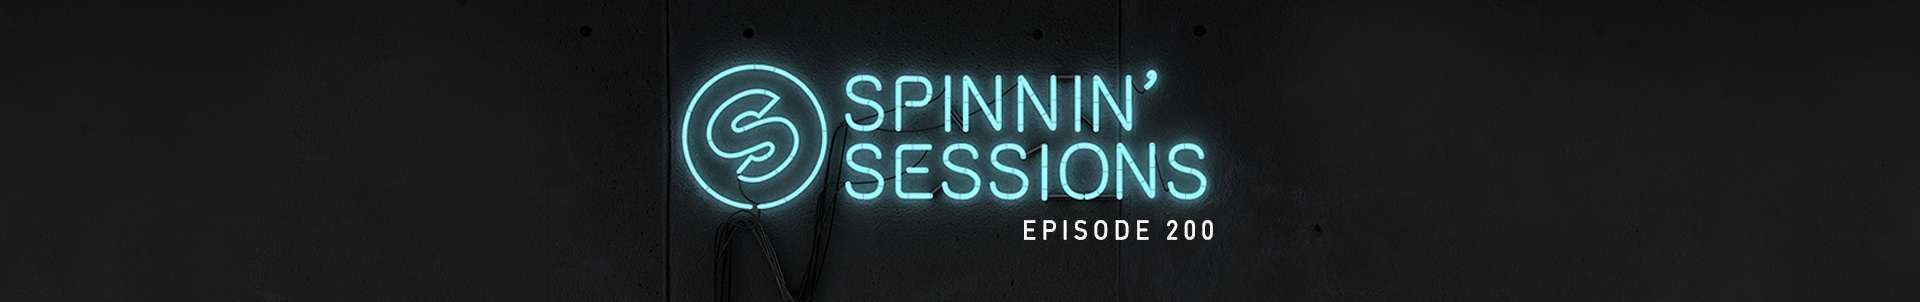 We Rave You premiere: The 200th Spinnin’ Sessions Radio Show!